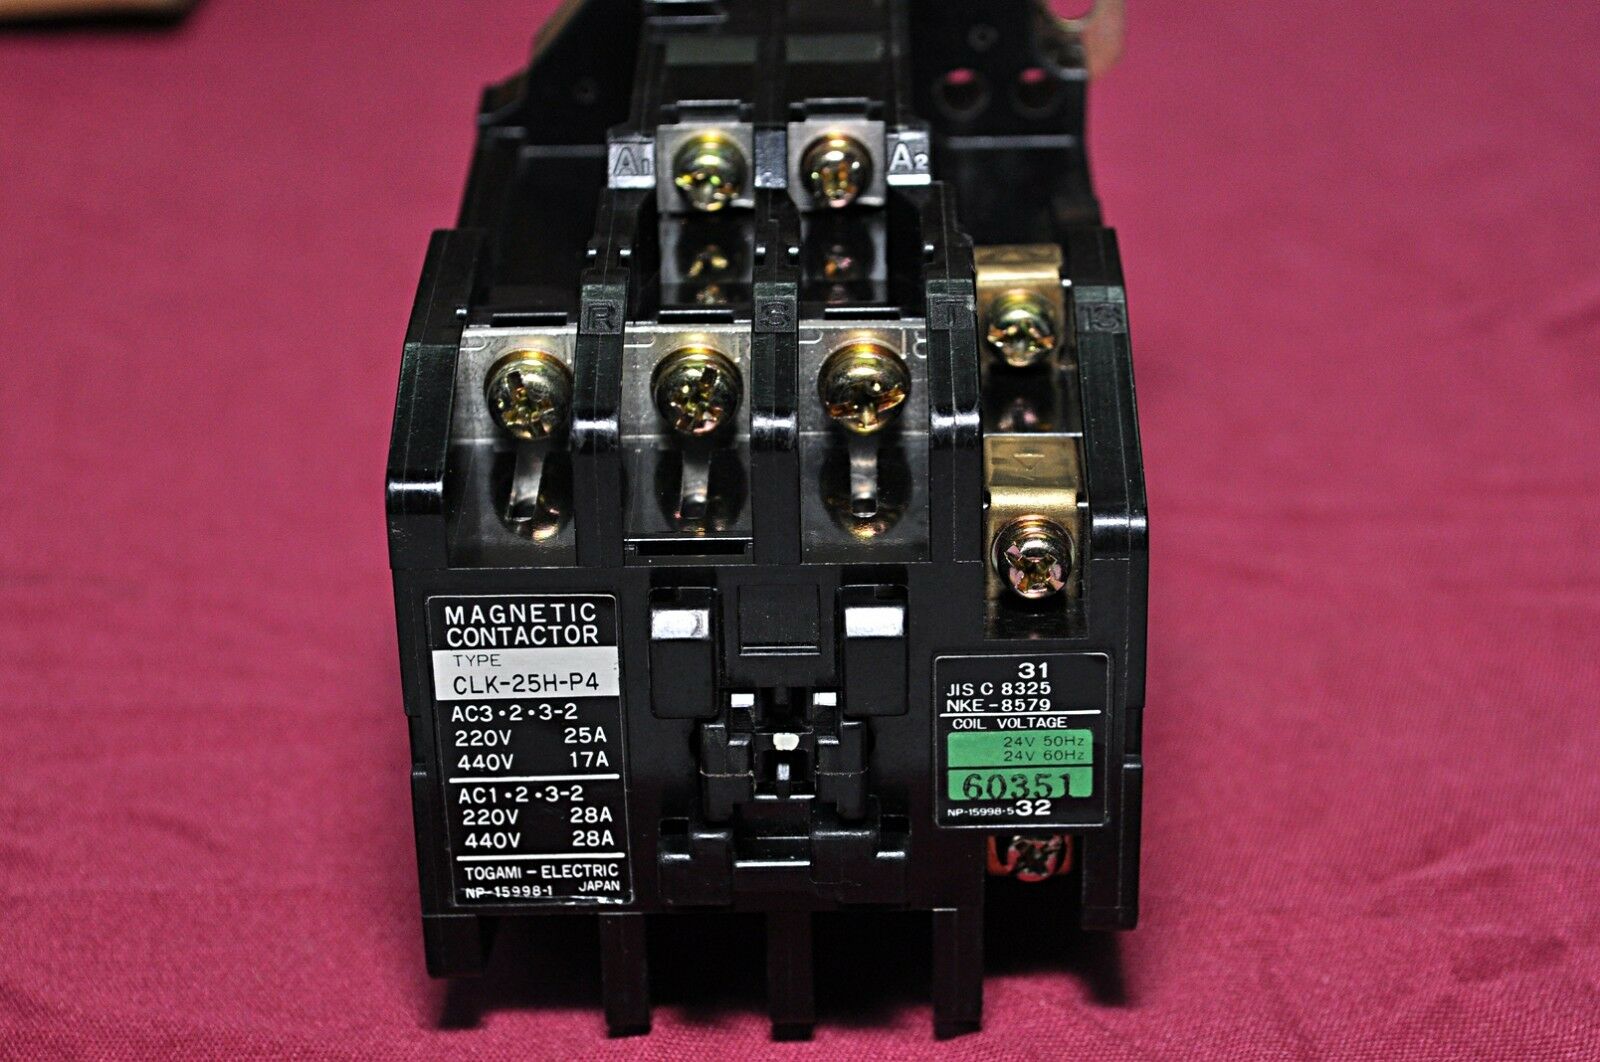 Togami electric clk 25h p4 magnetic contactor